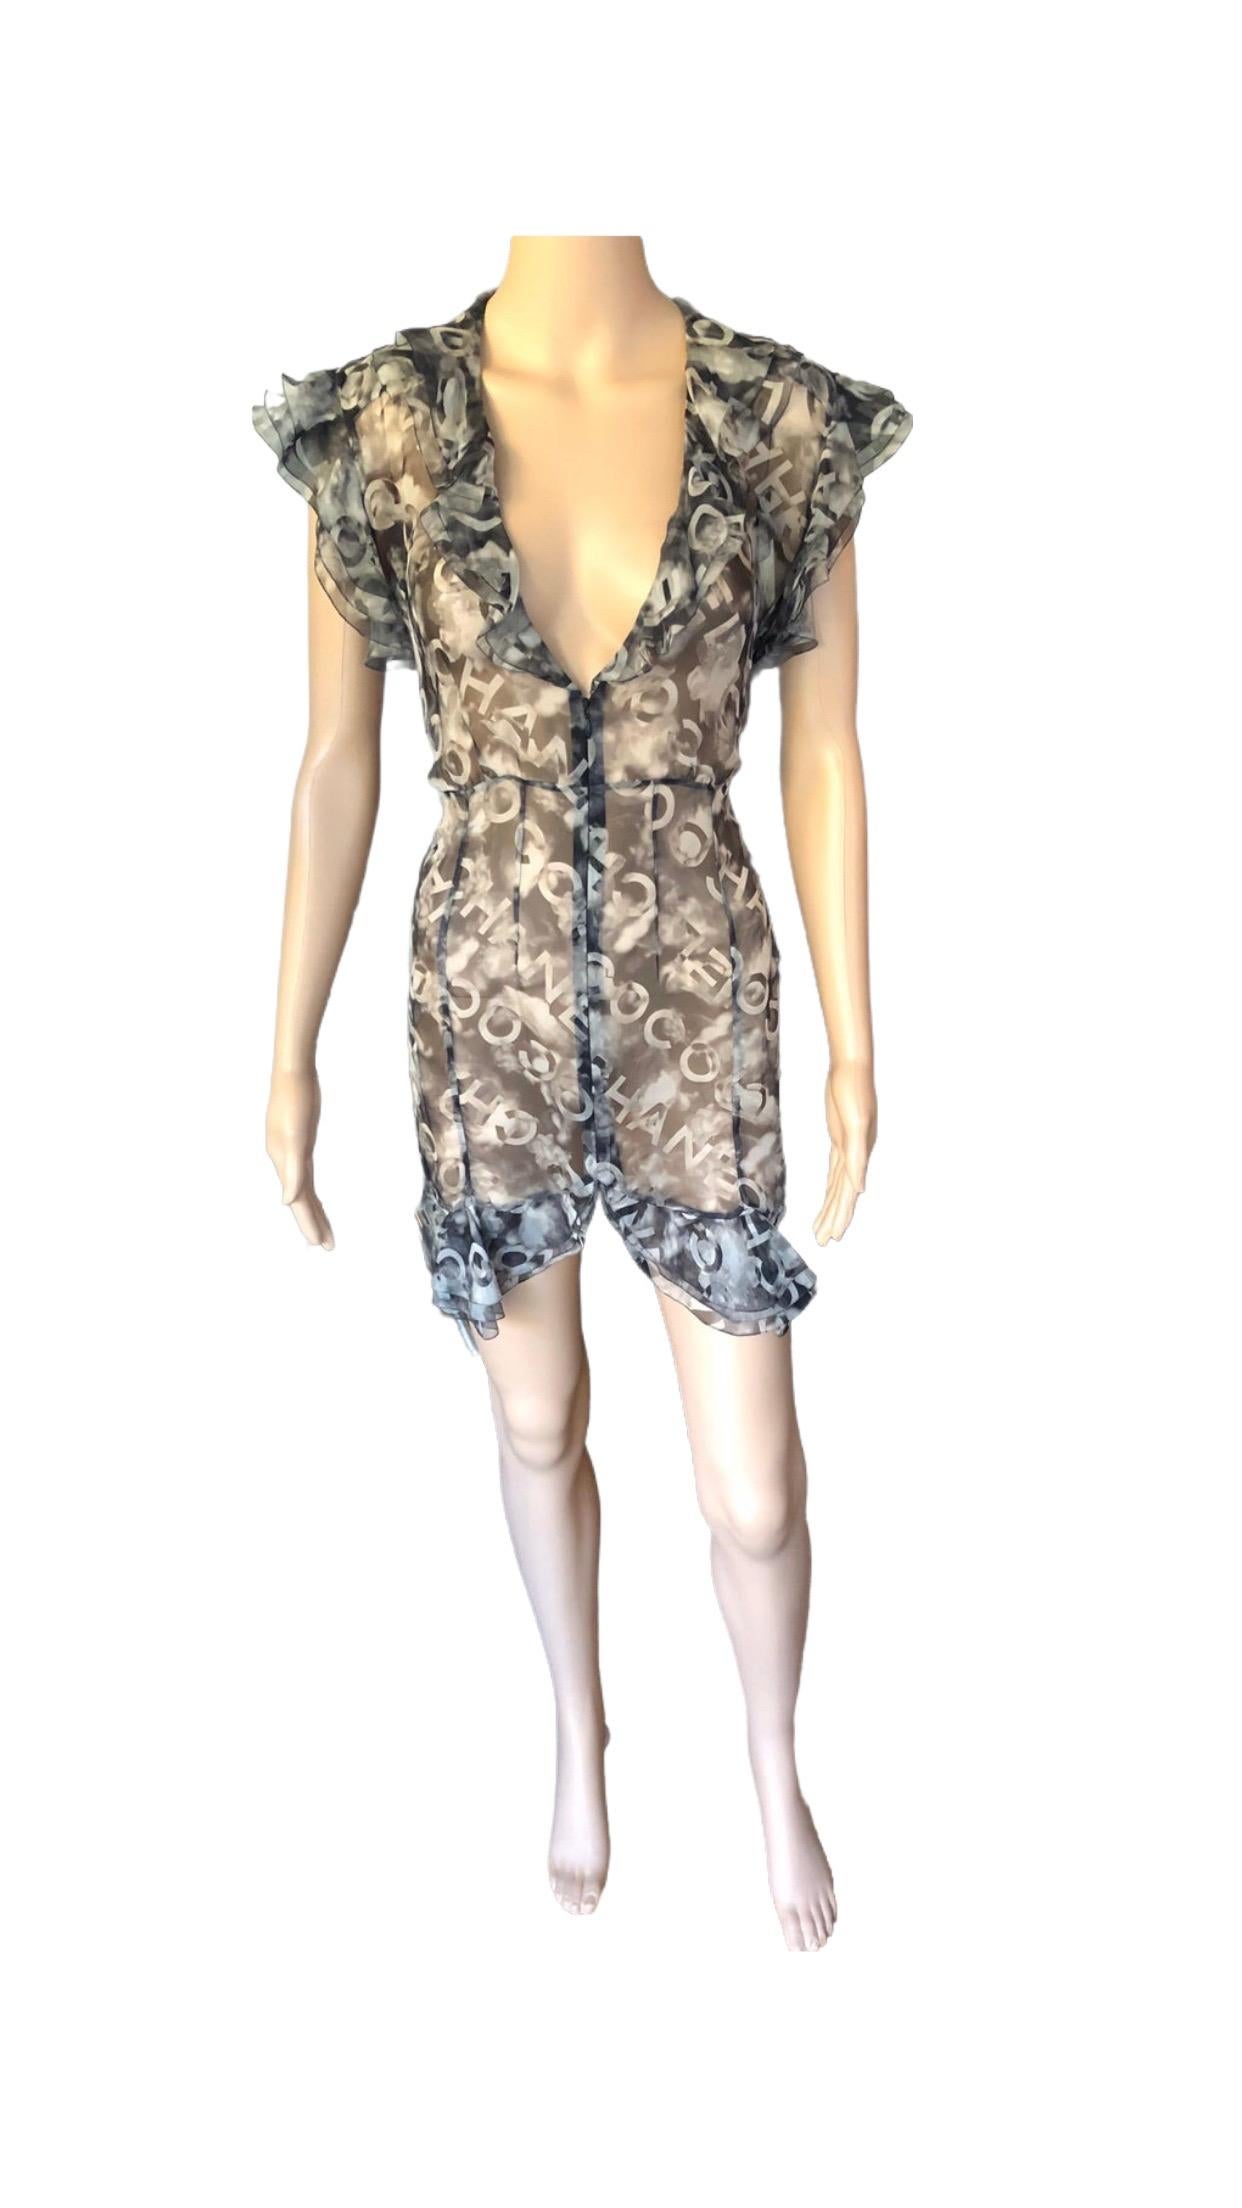 Chanel S/S 2002 Logo Monogram Sheer Plunging Silk Tunic Dress For Sale 3